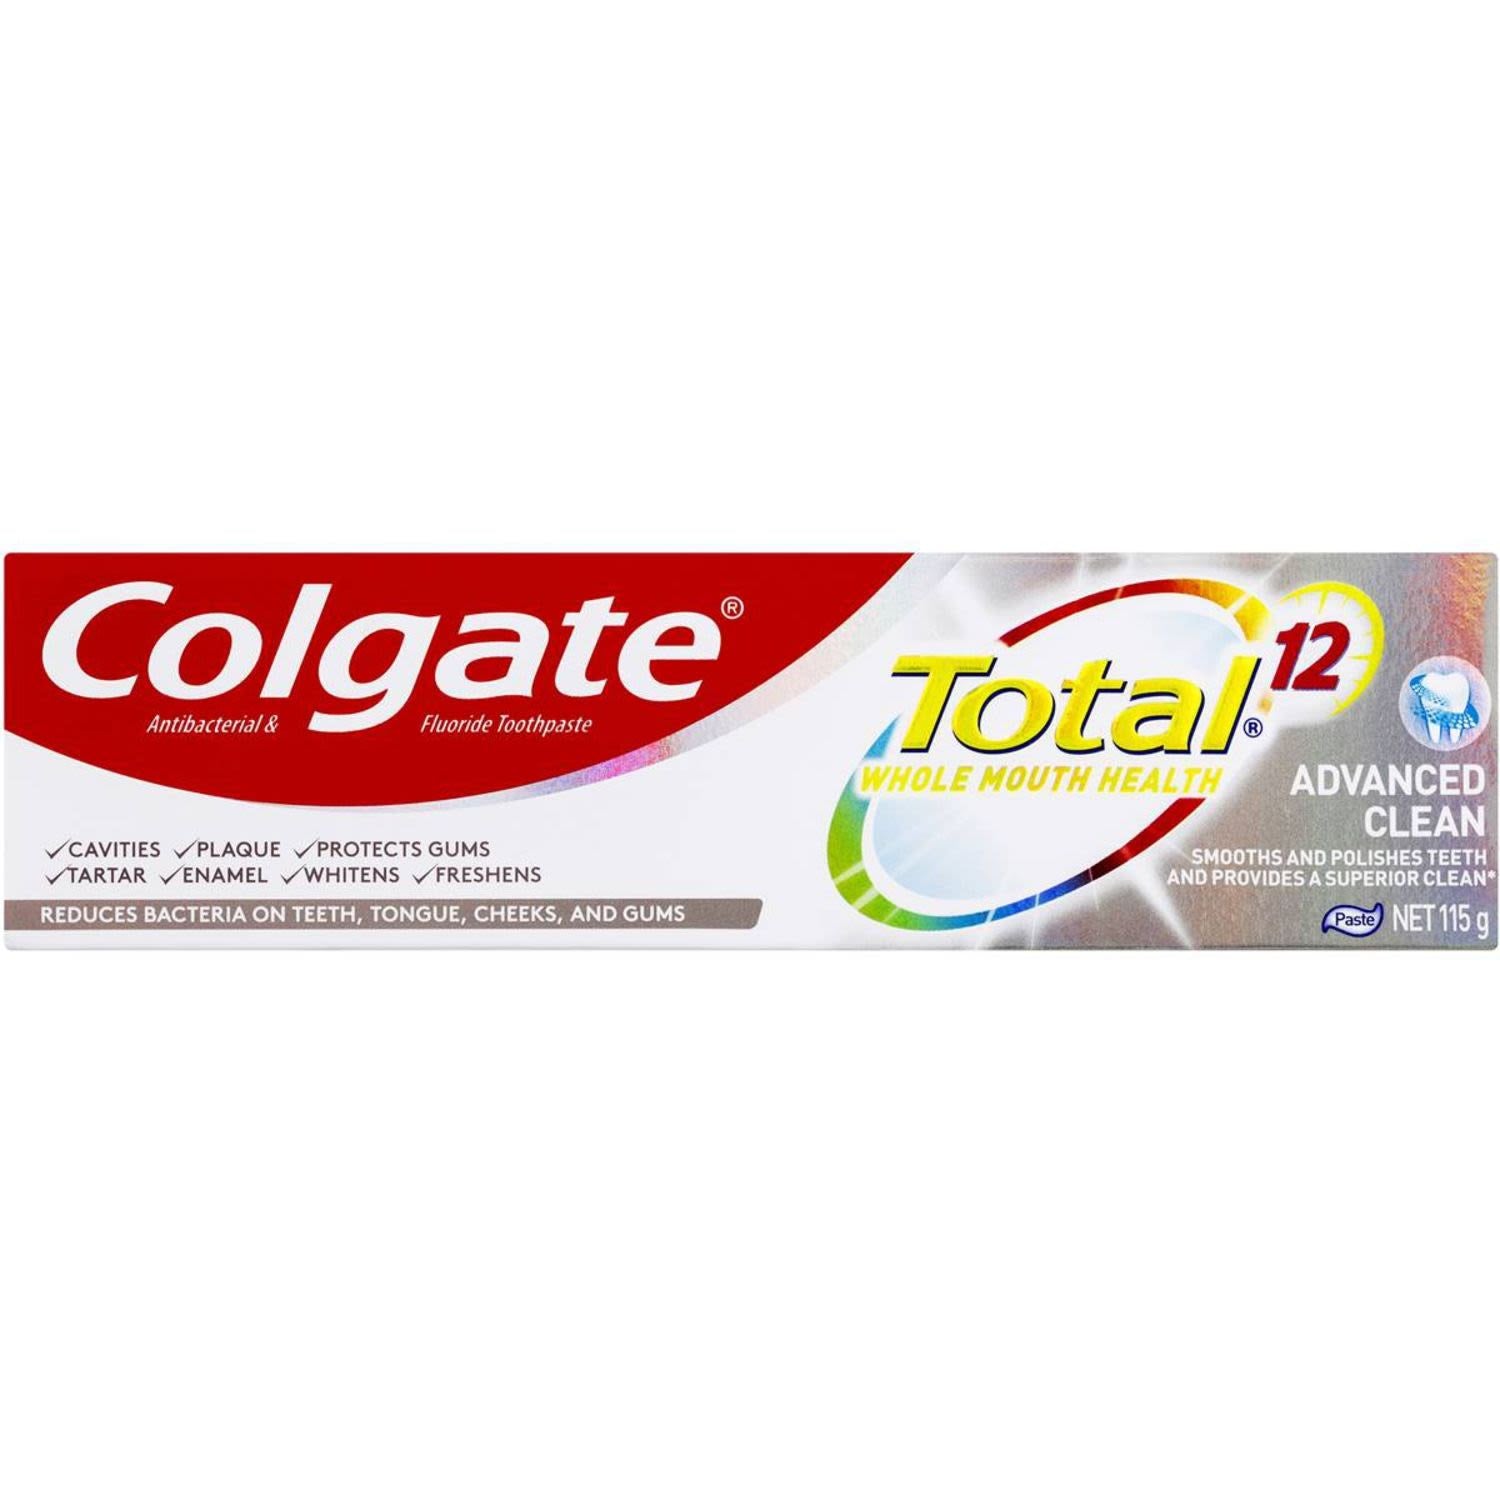 Colgate Advanced Clean Toothpaste 115g